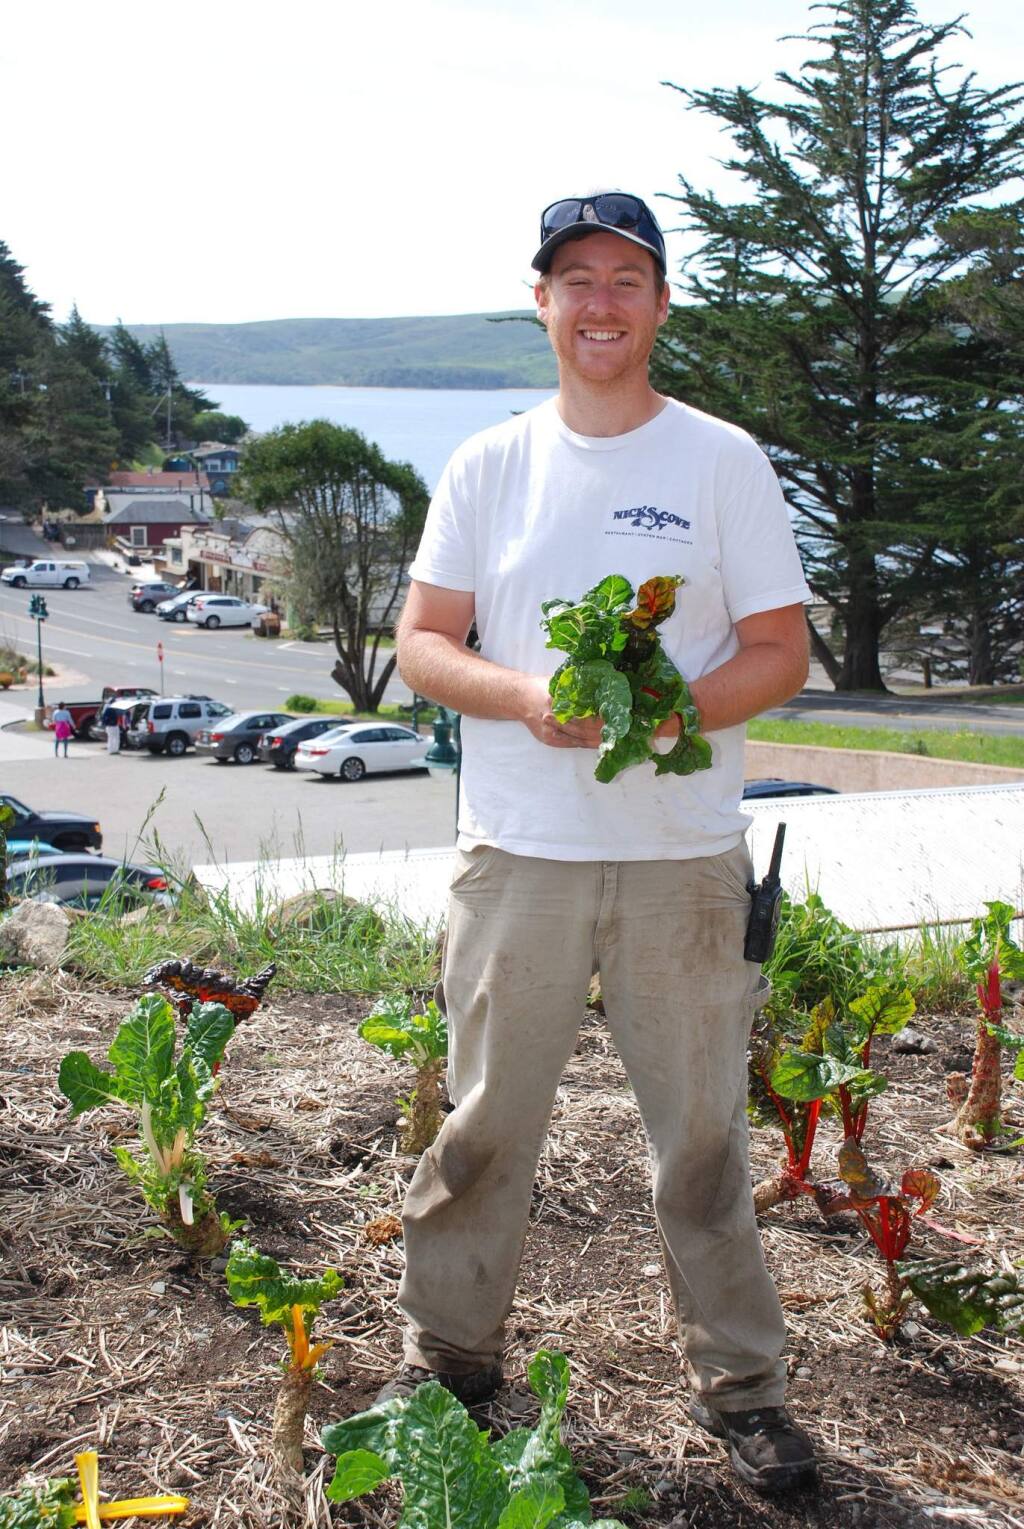 -Lucas Shapiro says that by late April, about half of the Nick Cove restaurant's produce comes from the garden.